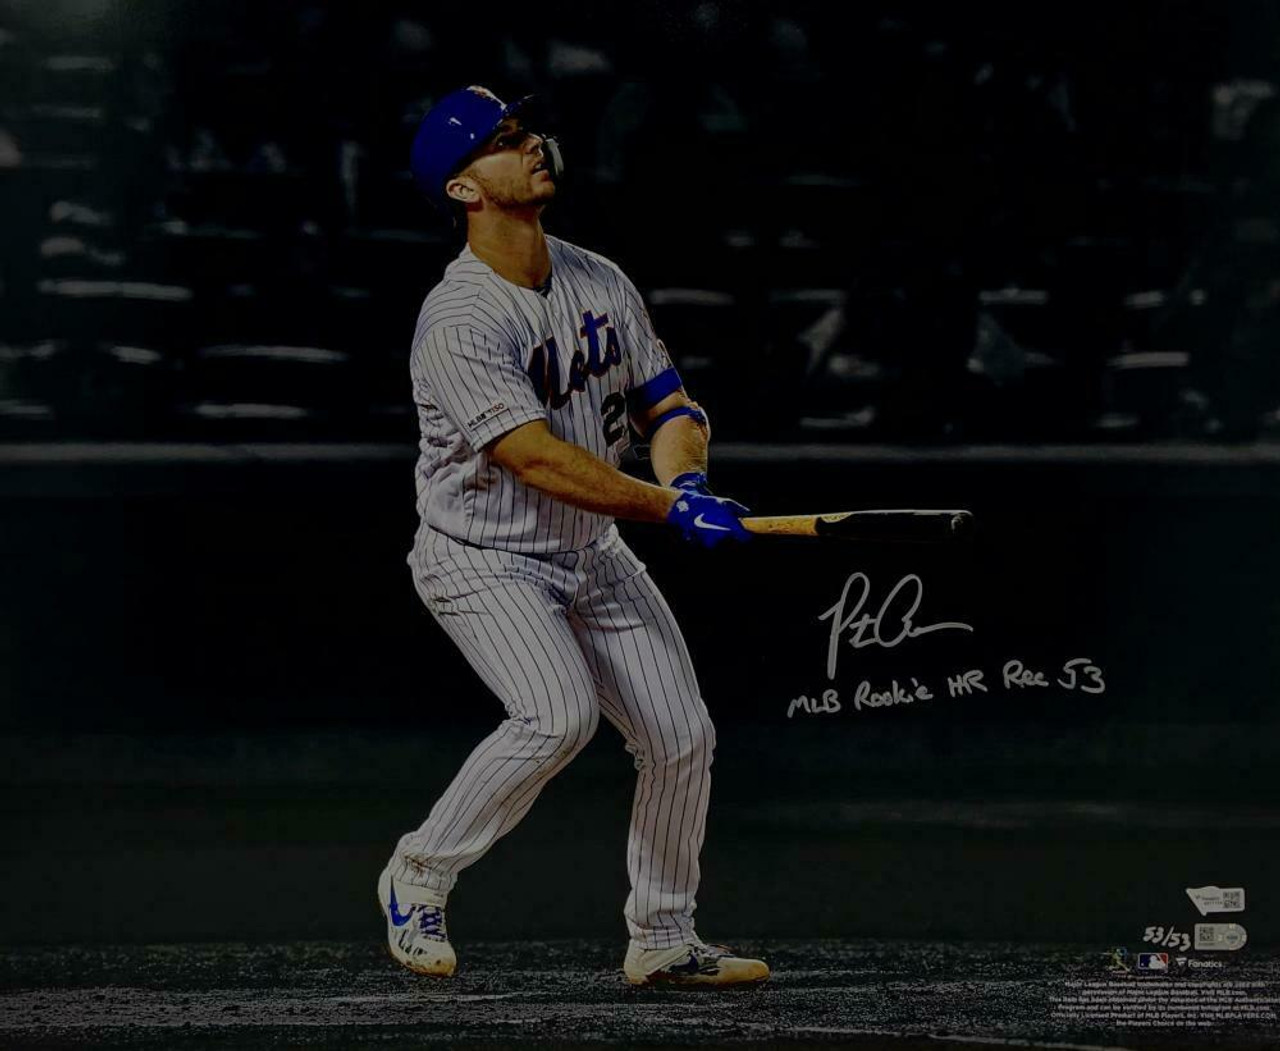 PETE ALONSO Autographed New York Mets MLB HR Rookie Rec 53 16x20 Photograph  FANATICS LE 53/53 - Game Day Legends